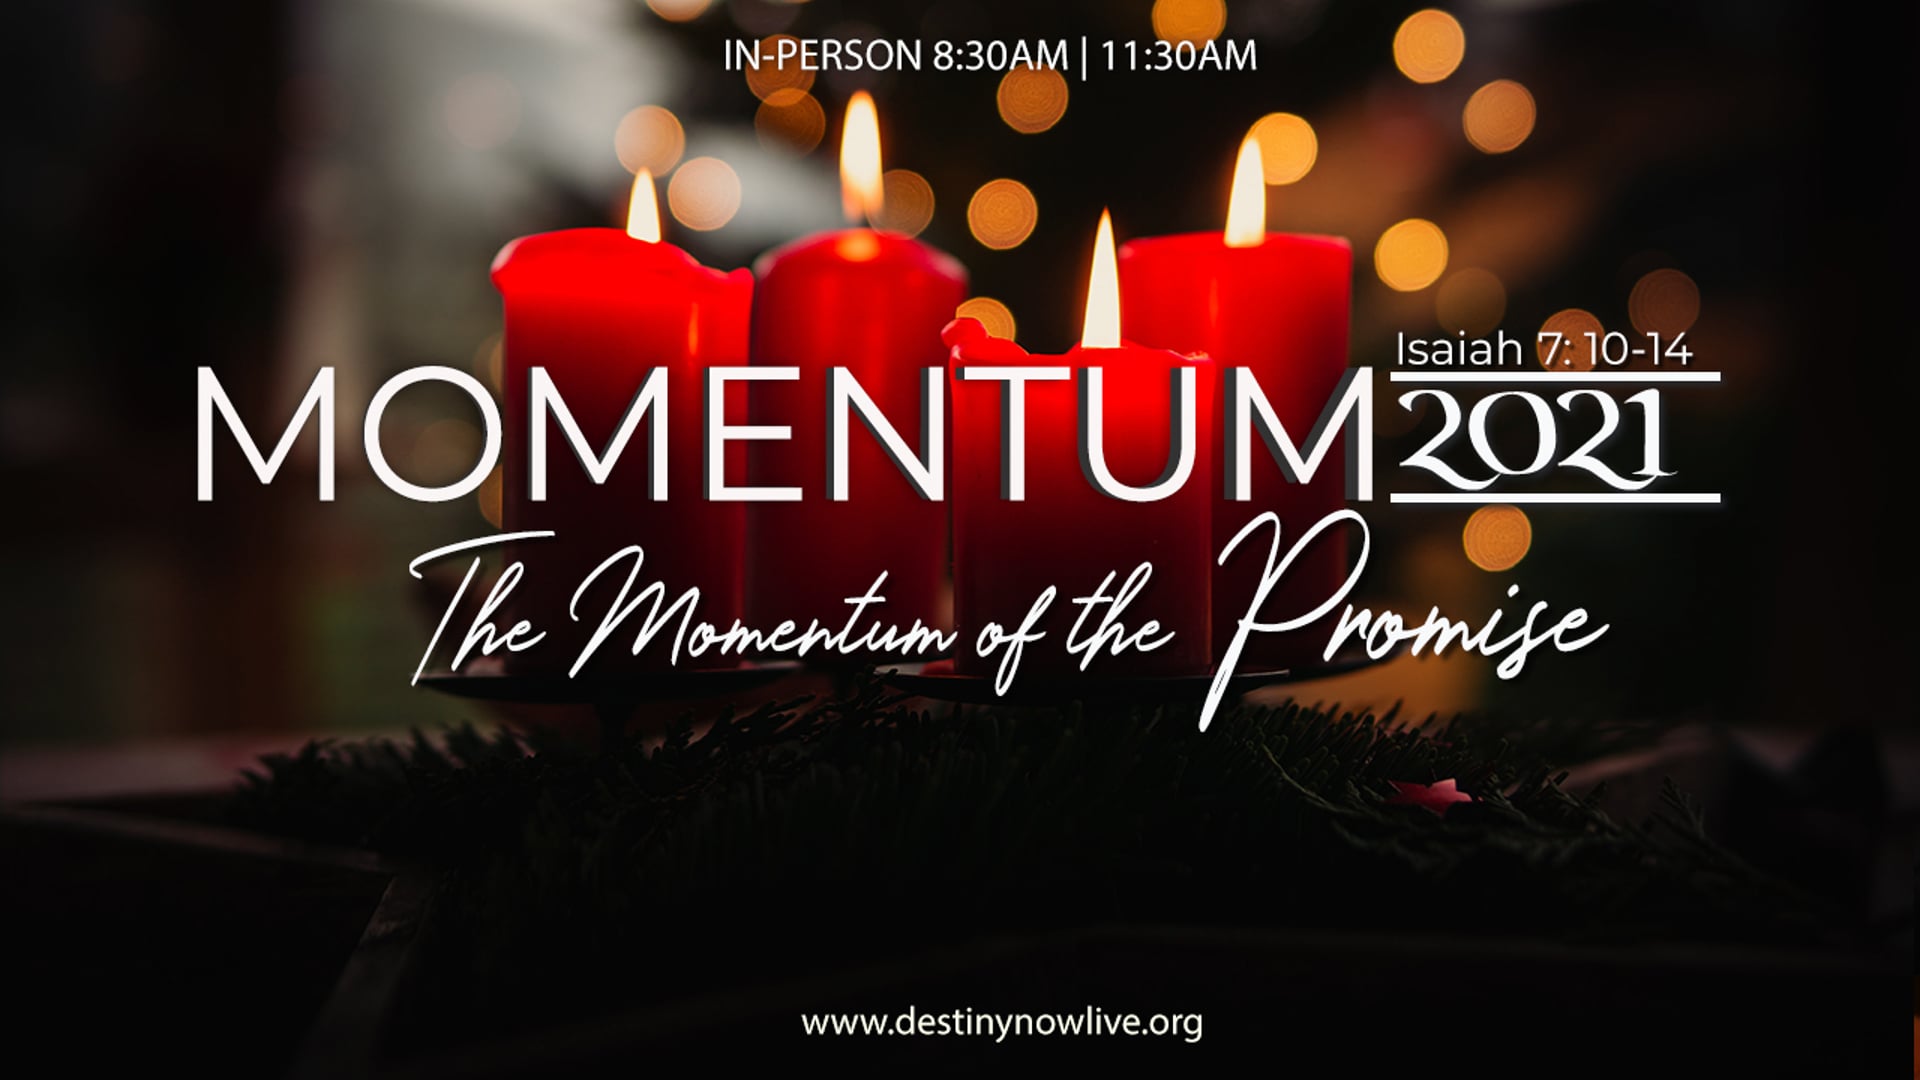 The Momentum of the Promise